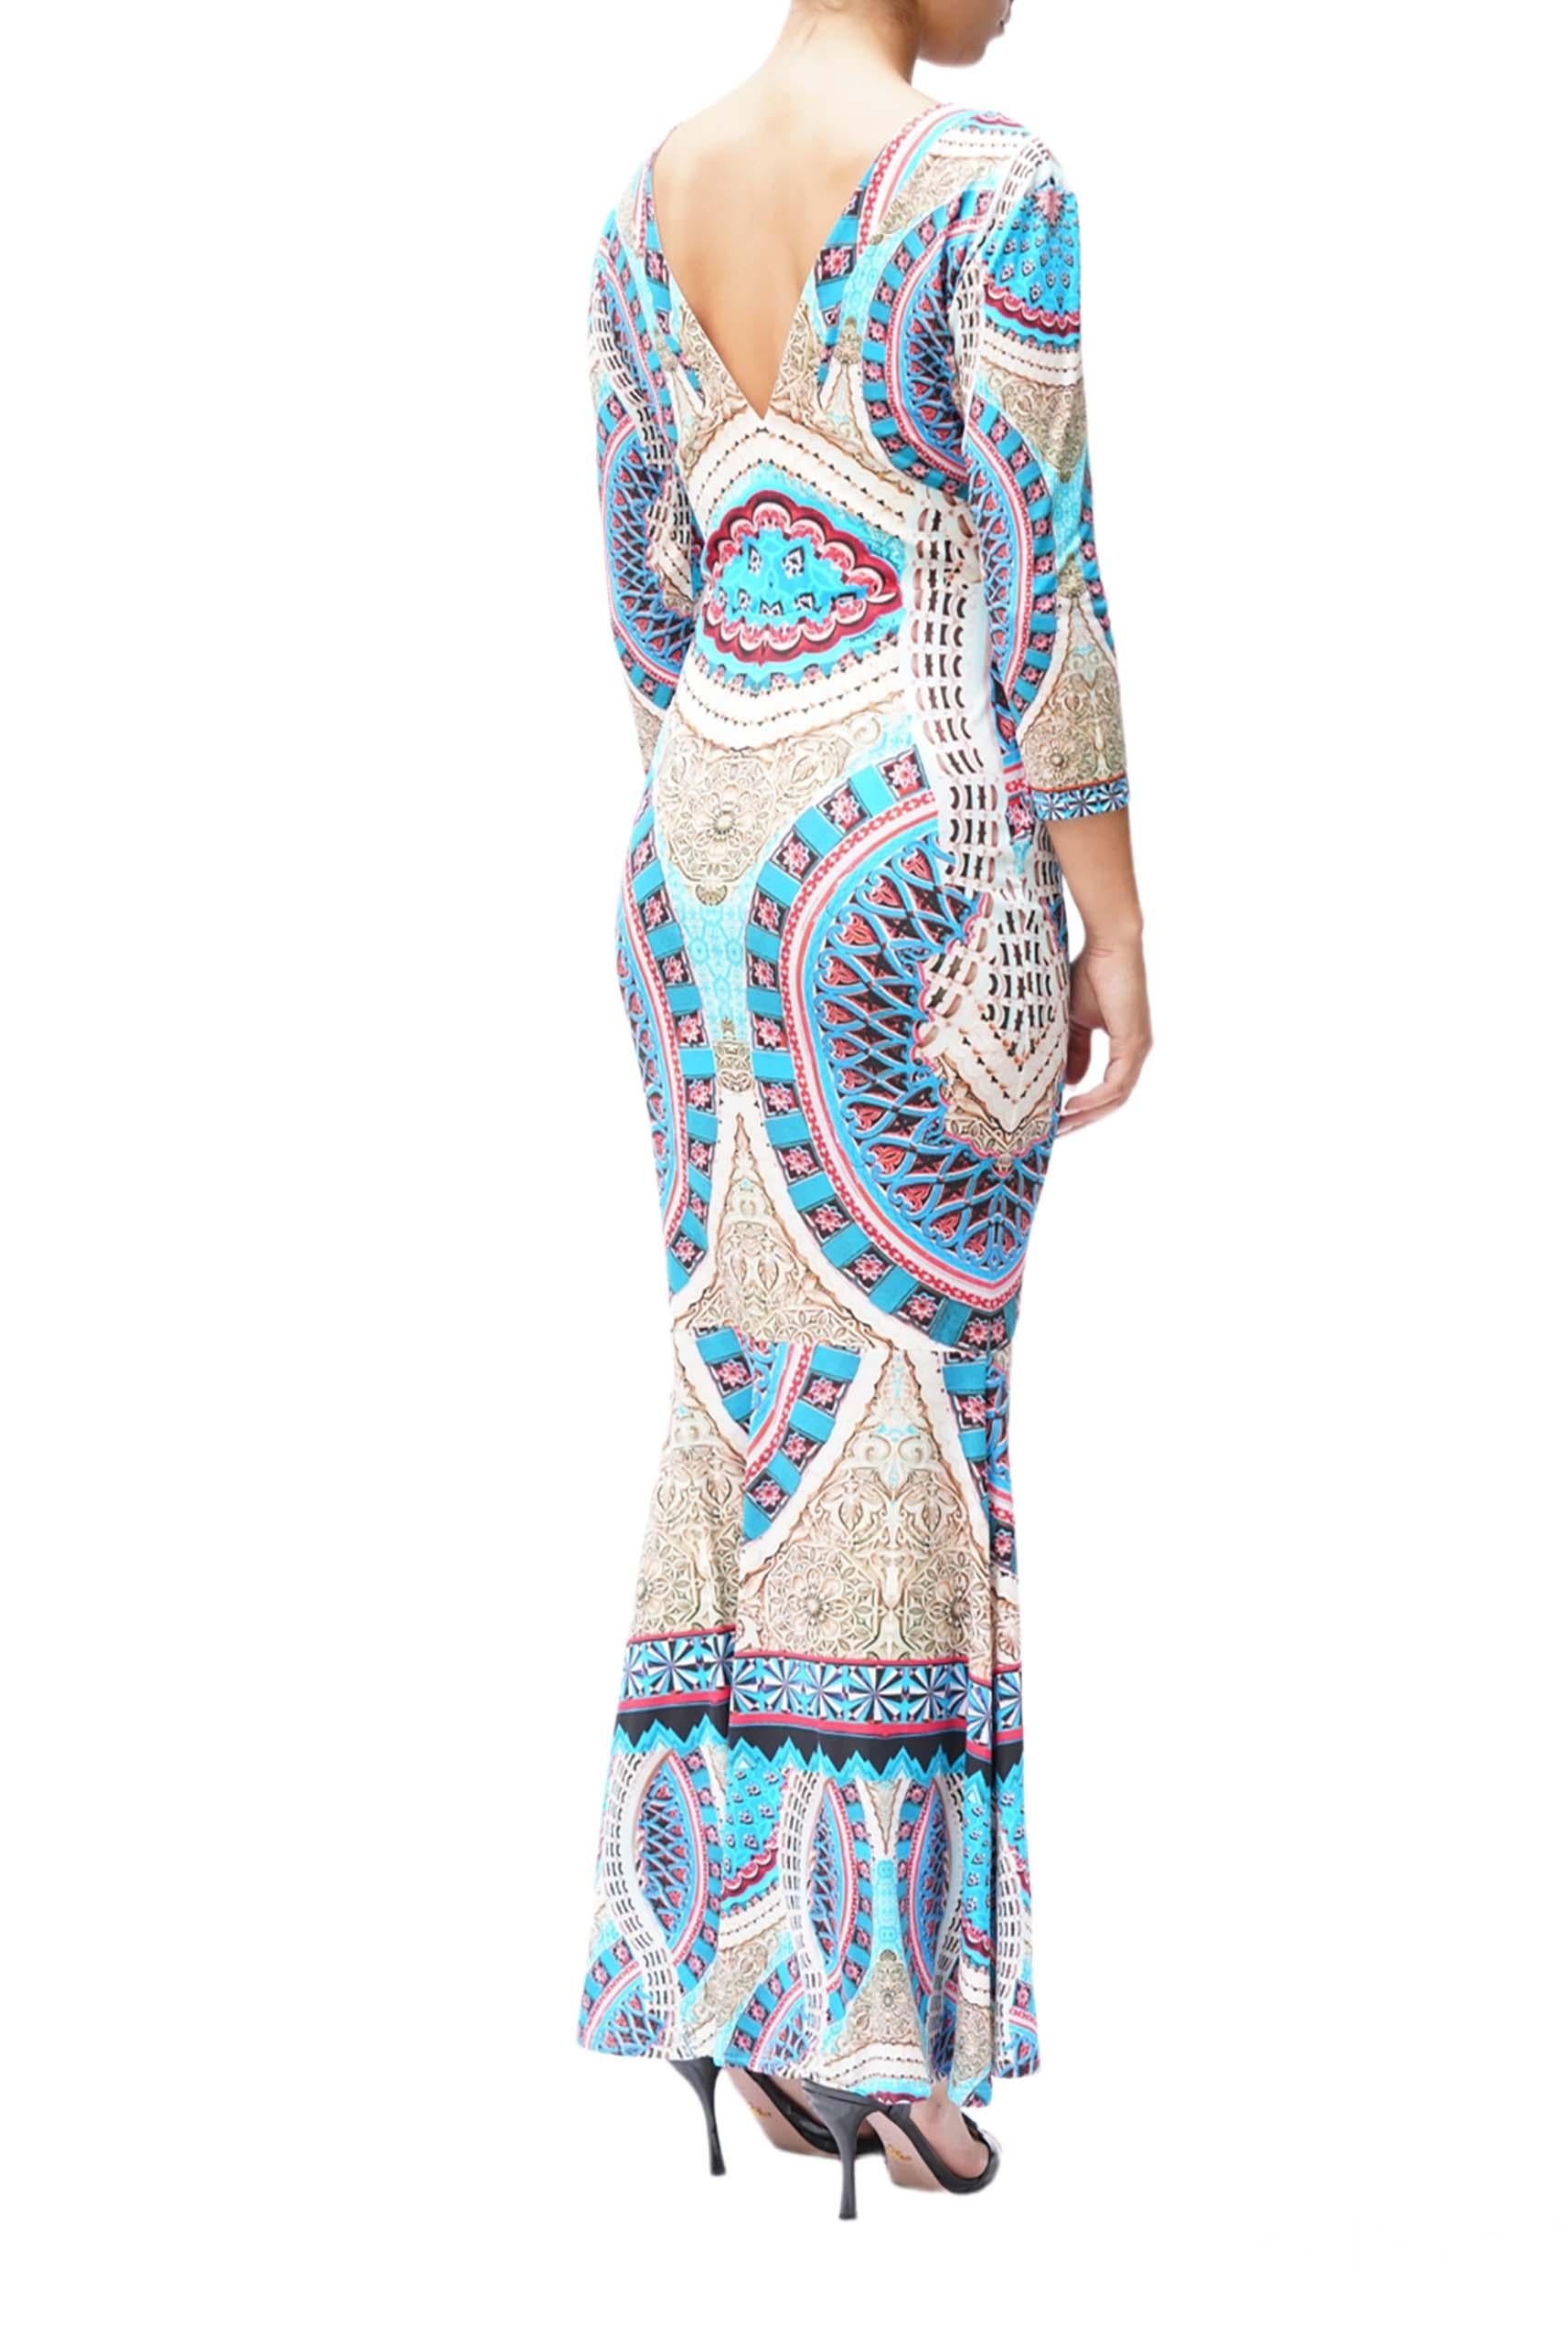 ROBERTO CAVALLI Electric Blue V Neck Kaleidoscope Pattern Long Dress In Excellent Condition For Sale In New York, NY